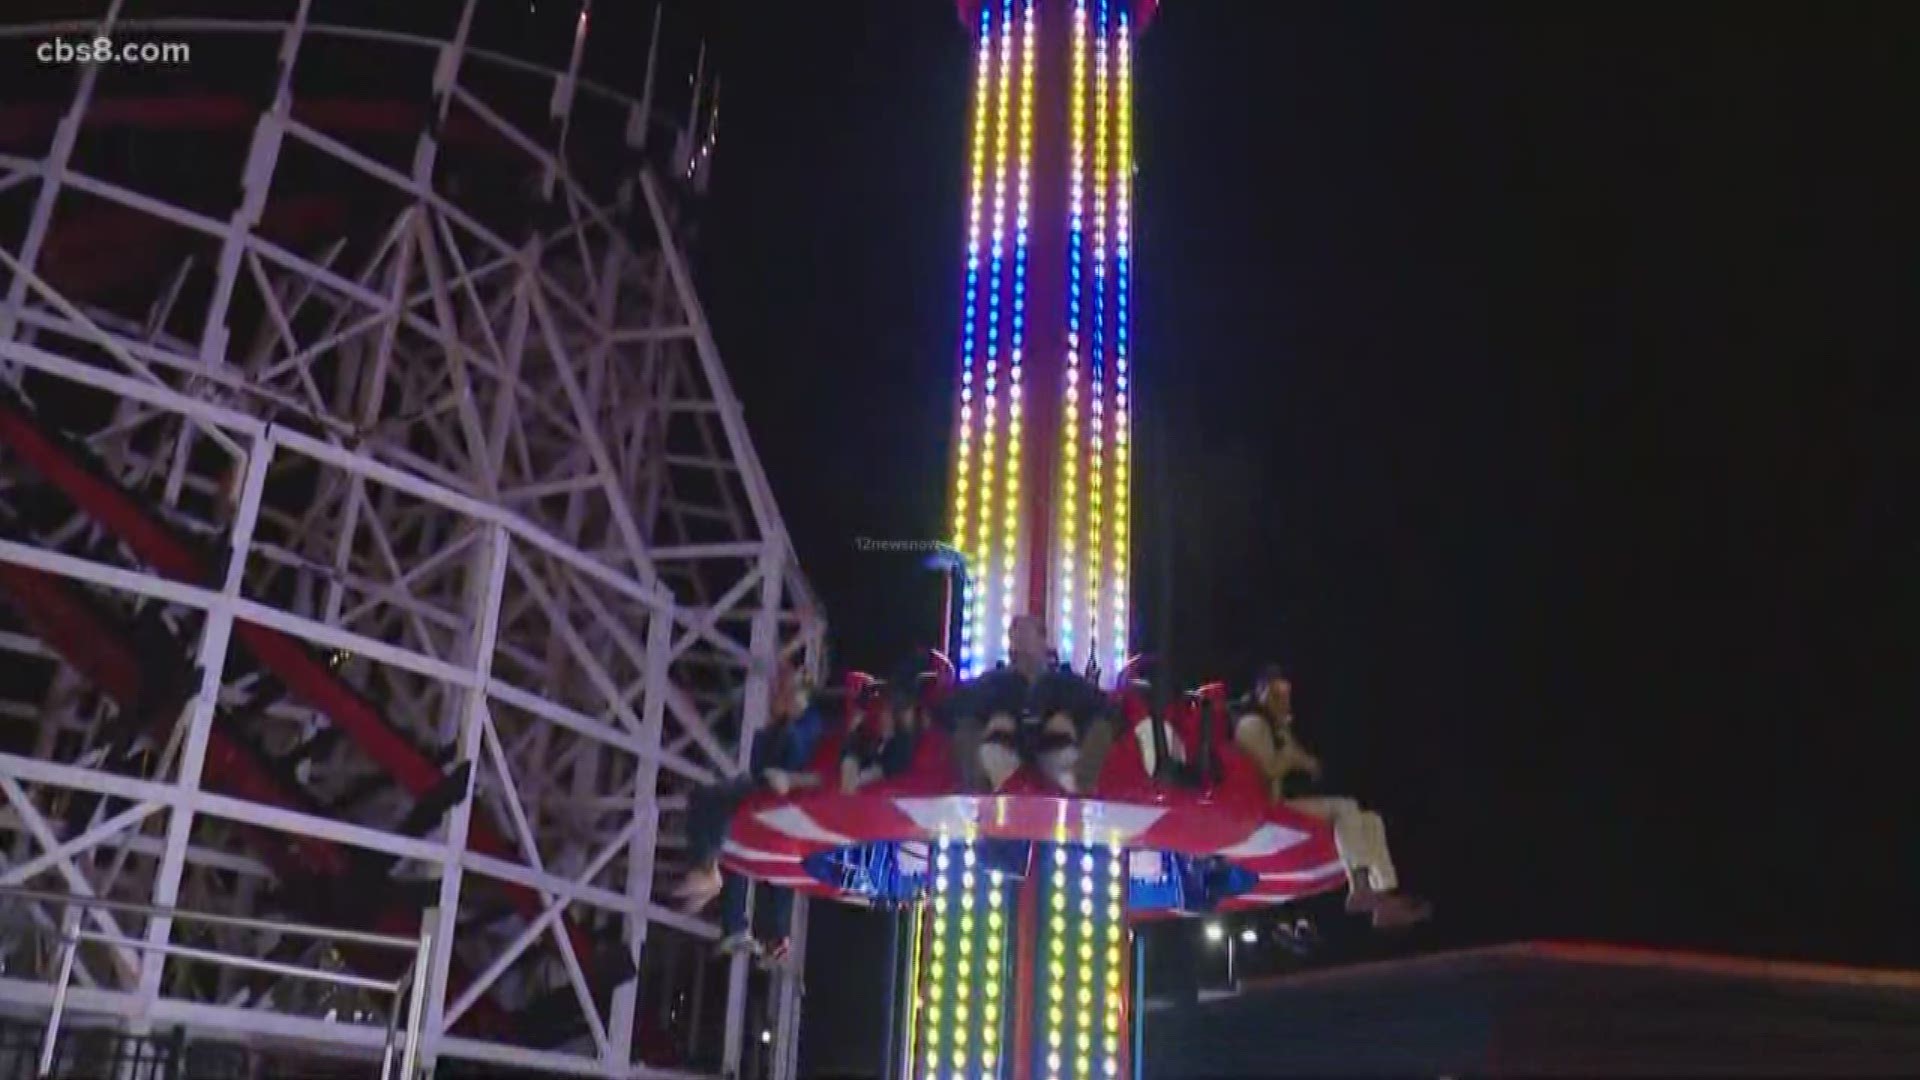 Ashley Jacobs shows some of the brand new attractions at Belmont Park